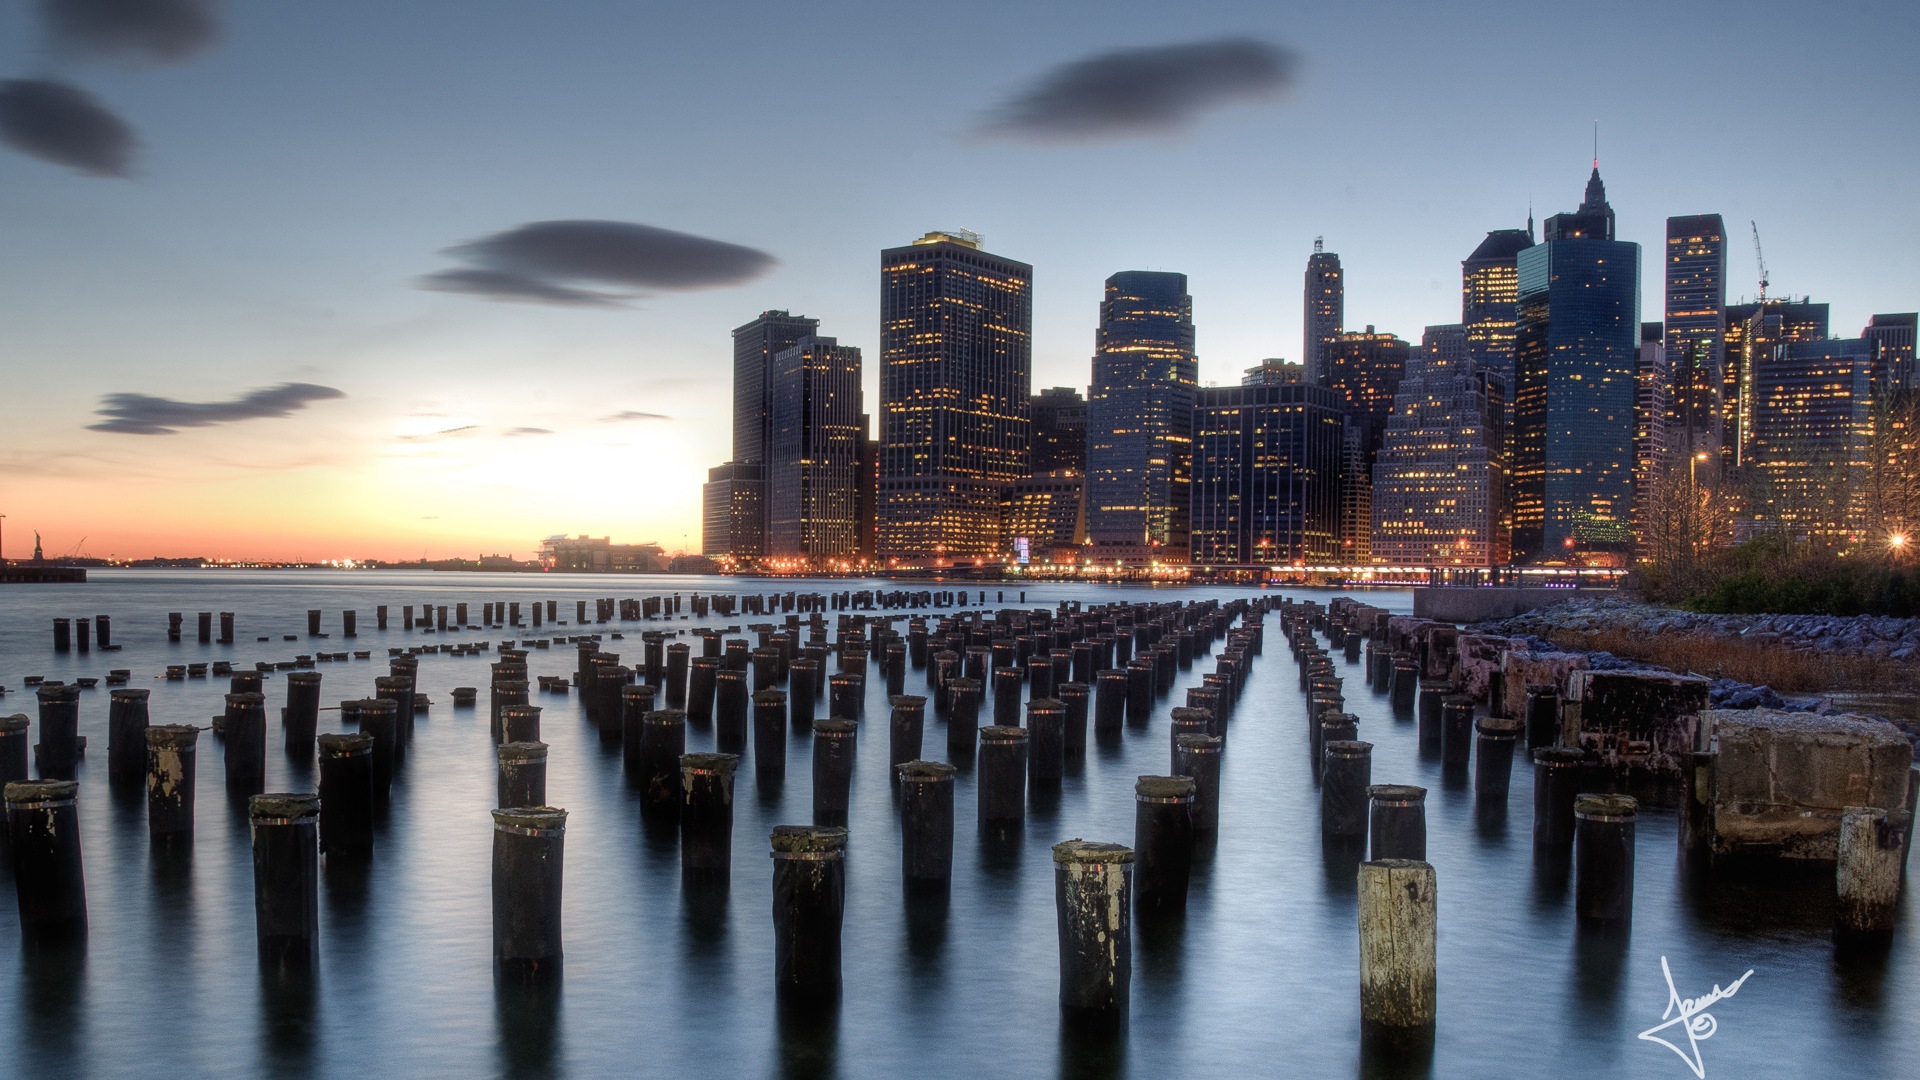 New York cityscapes, Microsoft Windows 8 HD wallpapers #1 - 1920x1080